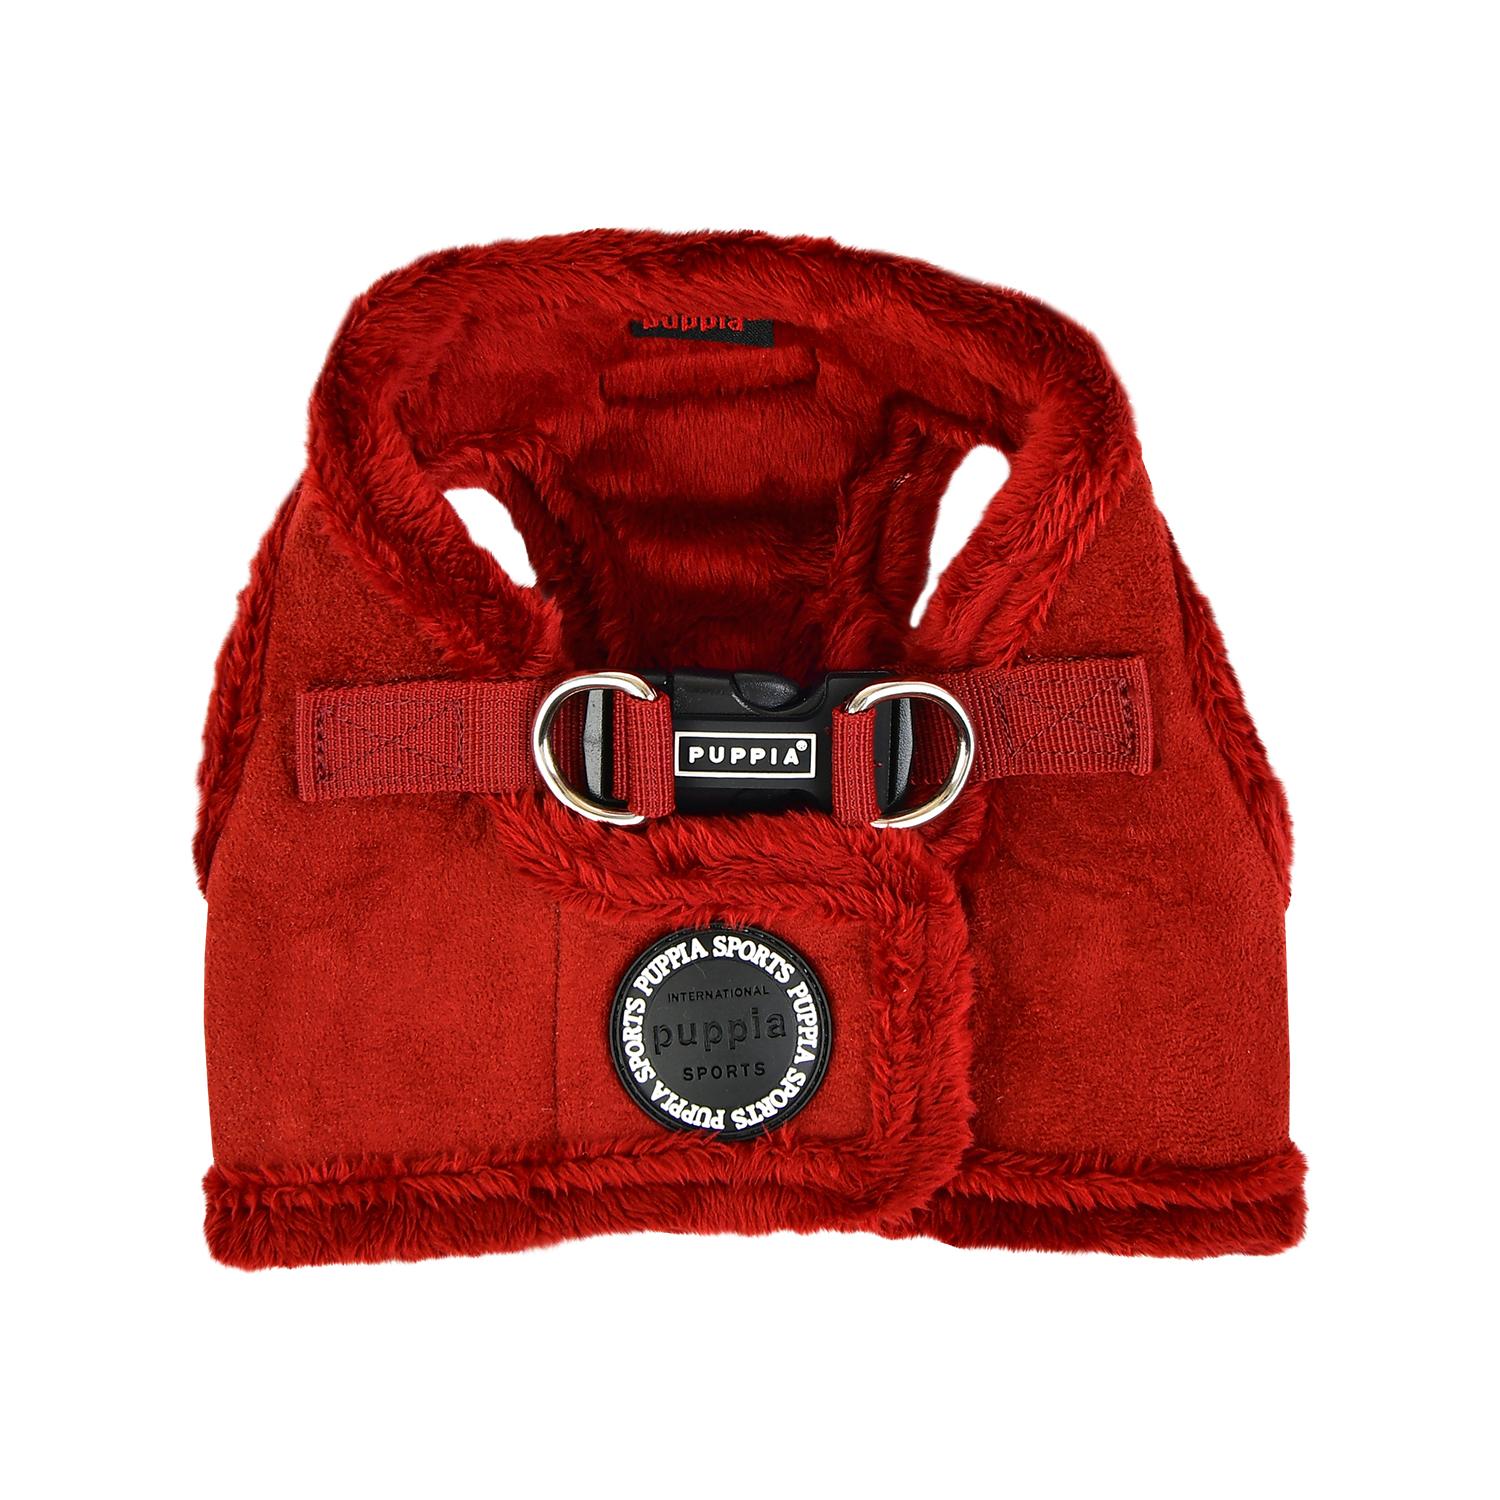 Terry Vest Dog Harness By Puppia - Wine